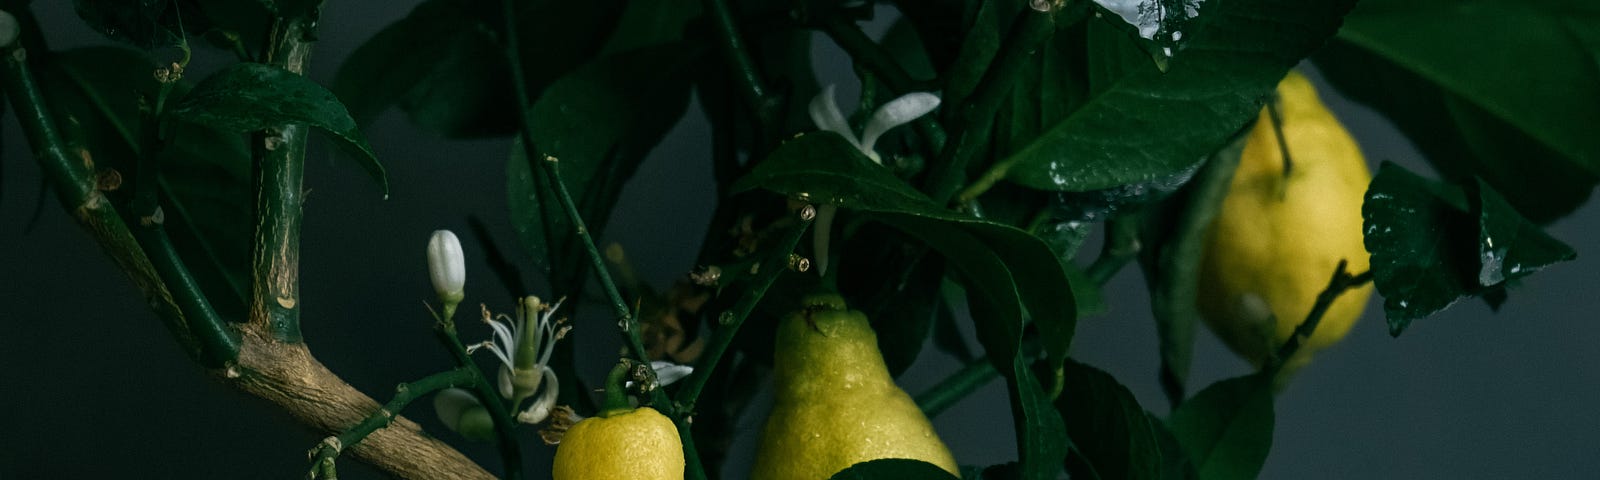 A thriving lemon tree flourishing in an unfamiliar setting, producing luscious ripe fruit surrounded by dew-kissed leaves adorning the branches.